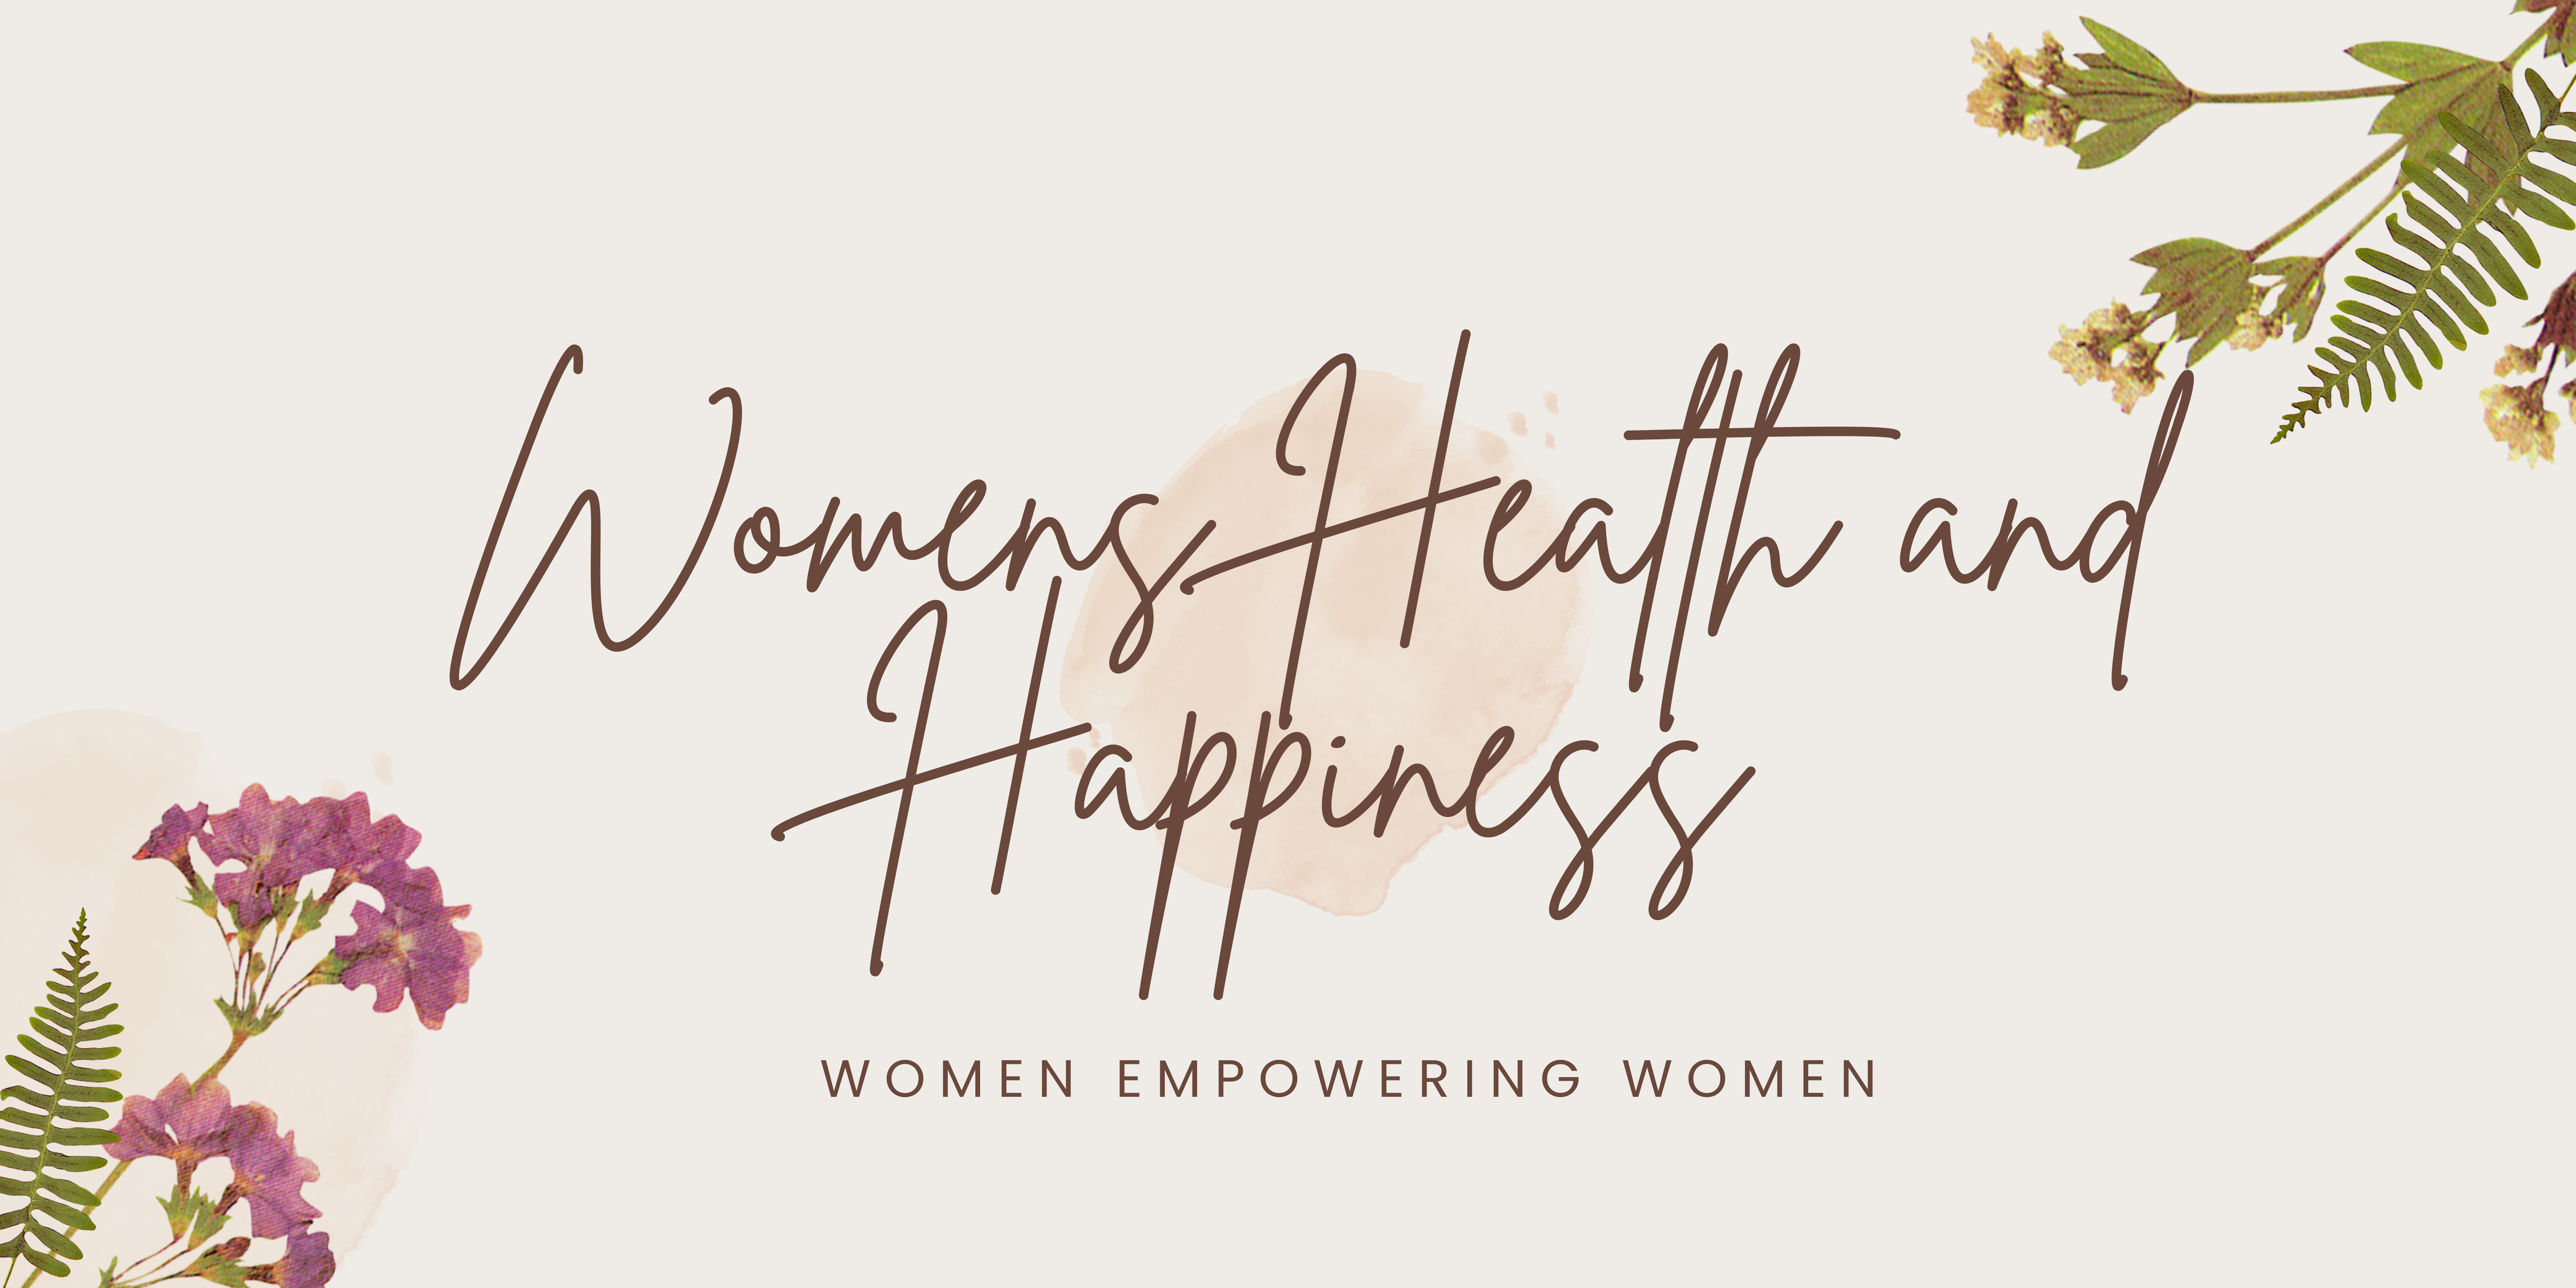 Women's Health and Happiness